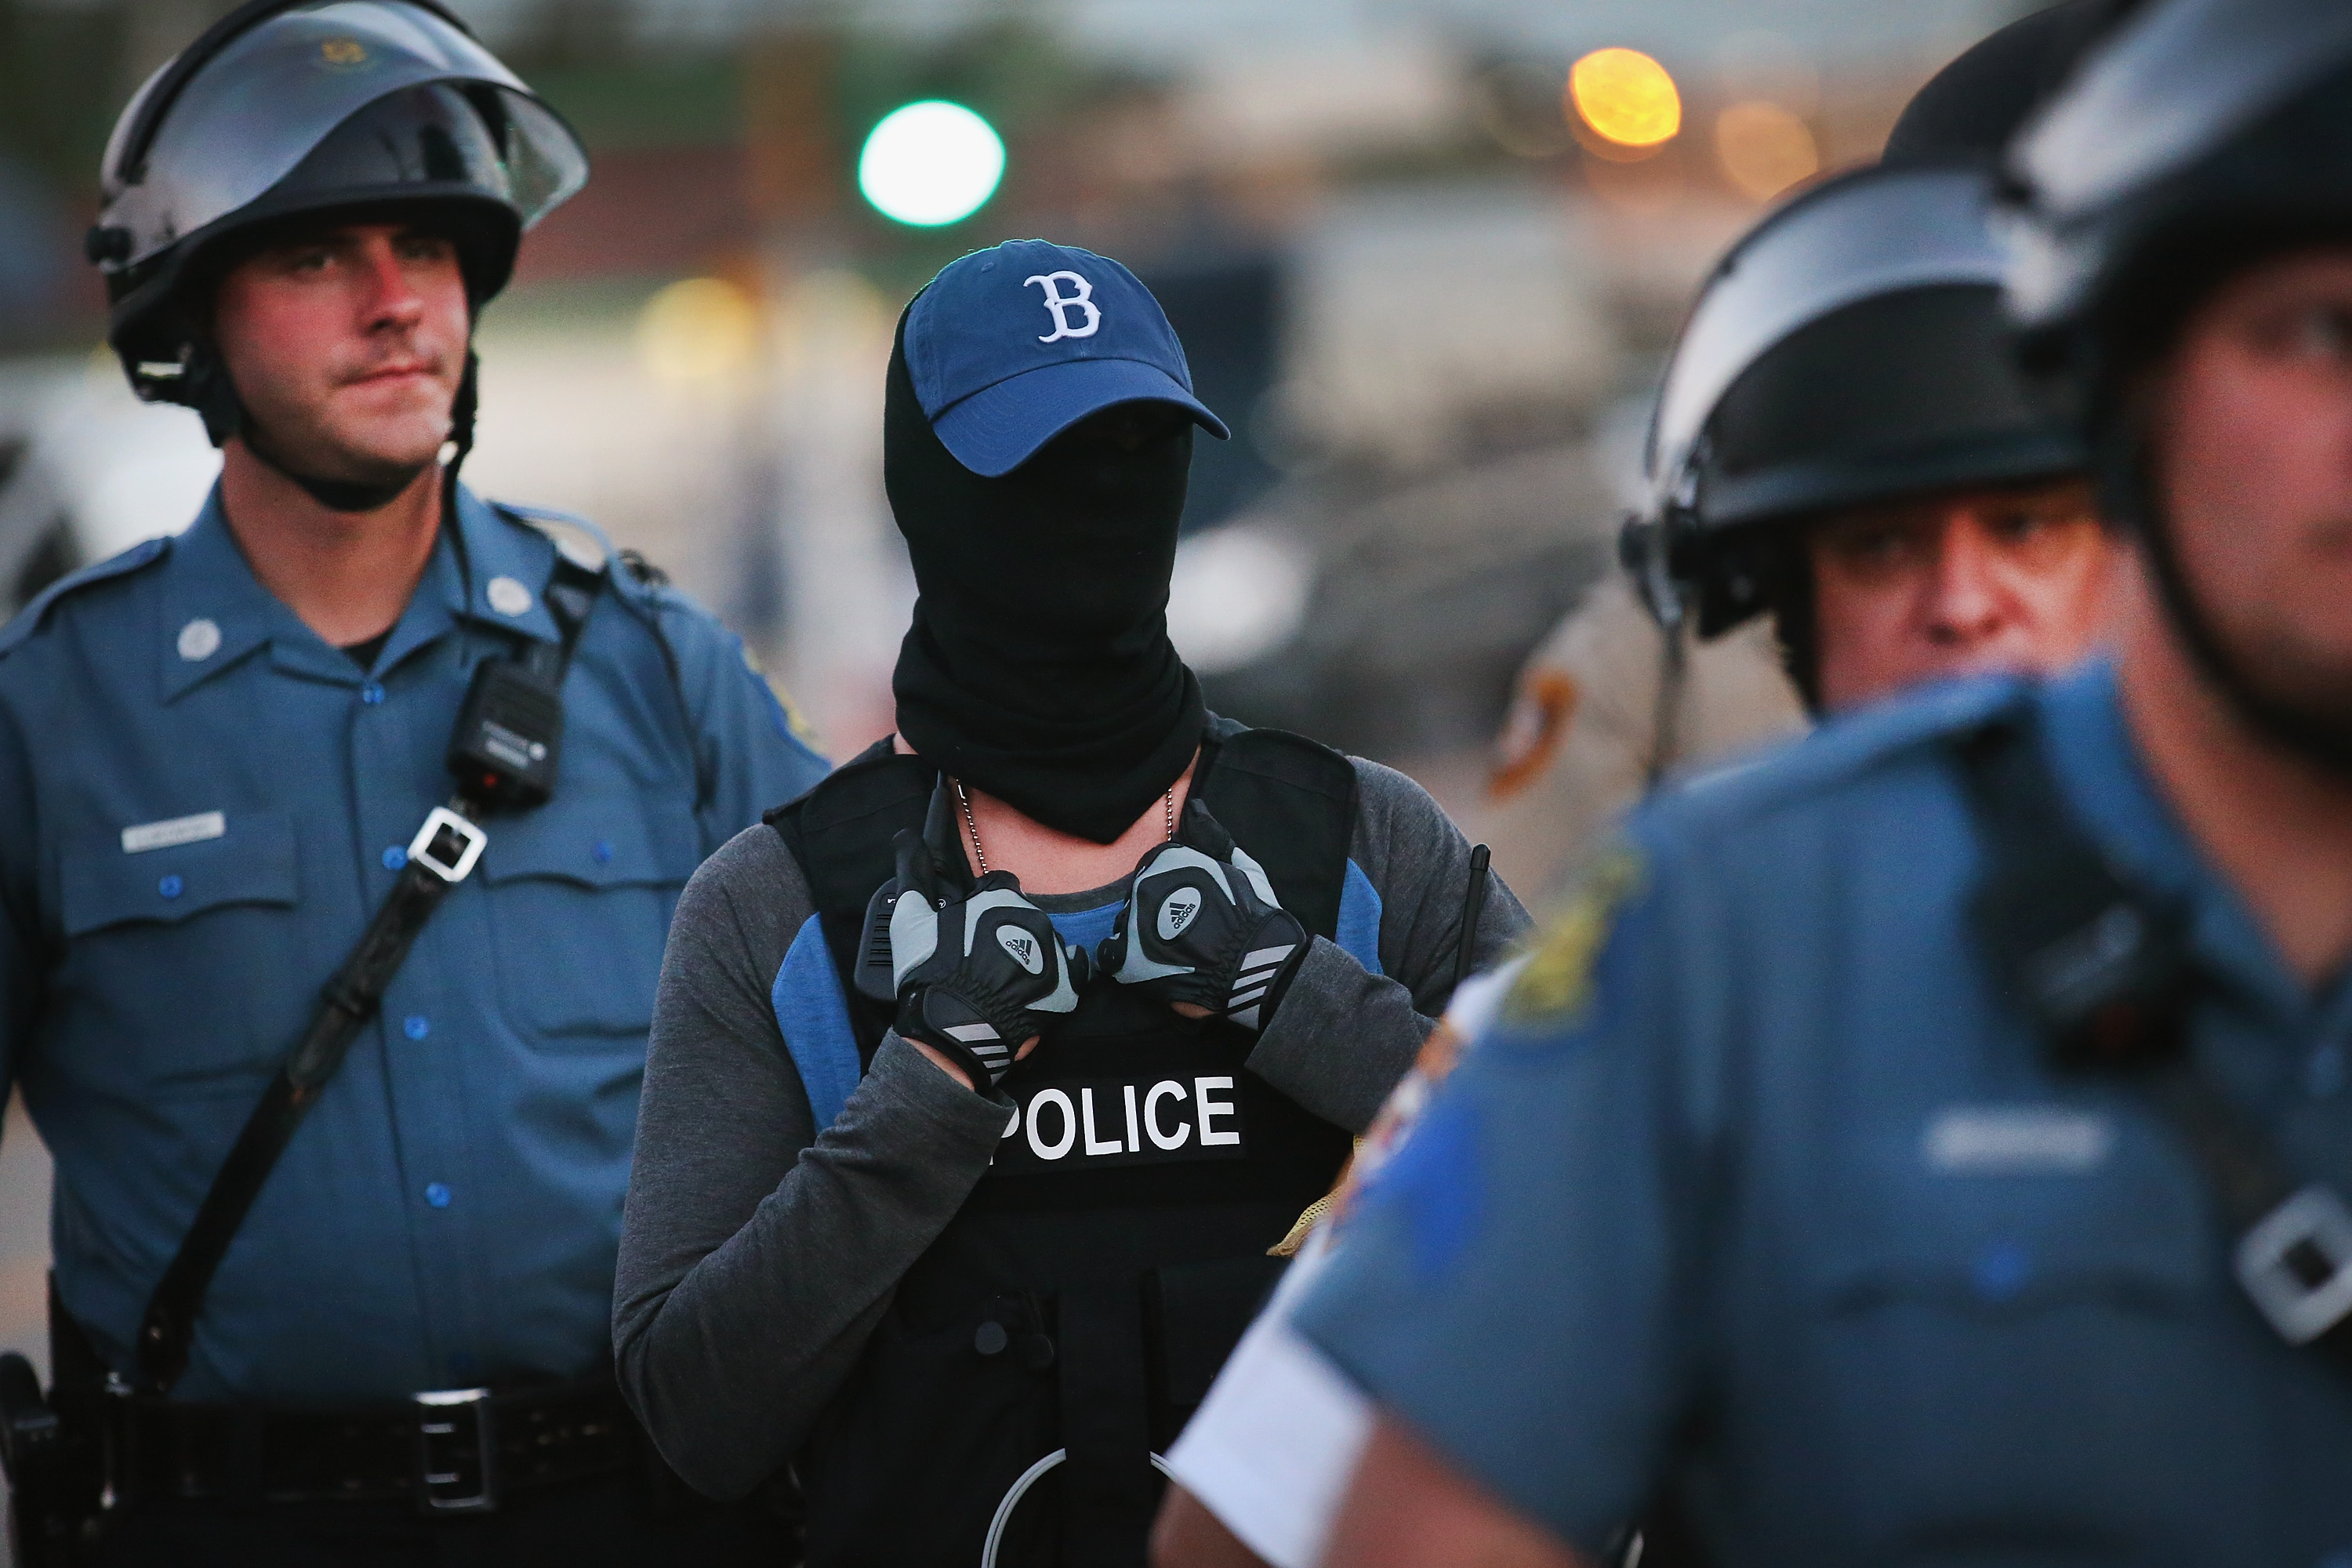 A police officer standing watch as demonstrators protest the shooting death of teenager Michael Brown conceals his/her identity on August 13, 2014 in Ferguson, Missouri. (Scott Olson—Getty Images)